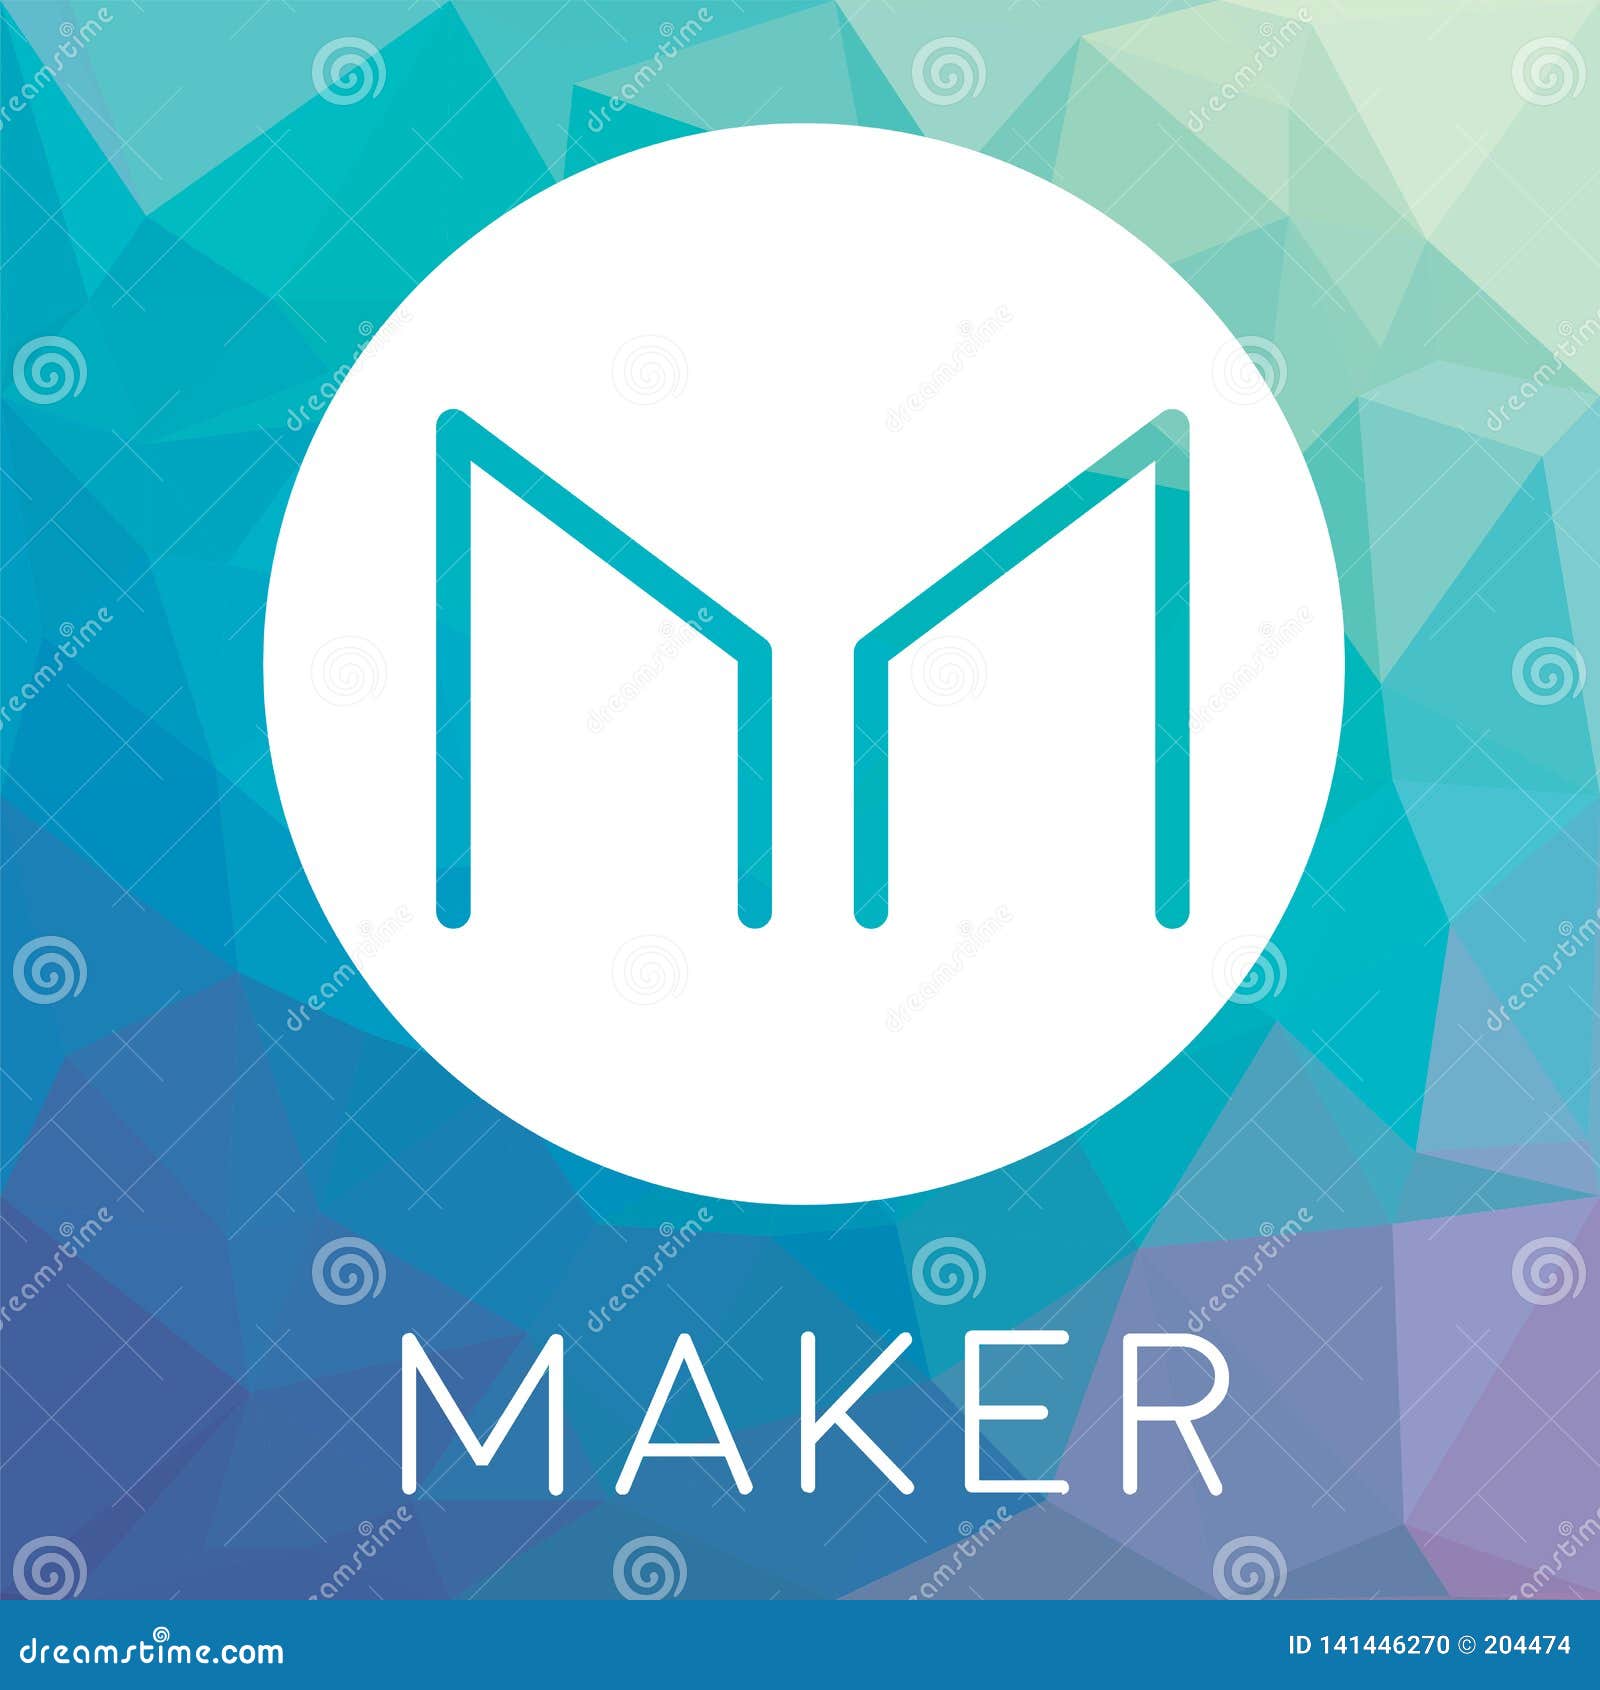 Maker MKR Decentralized Blockchain Cryptocurrency Vector ...